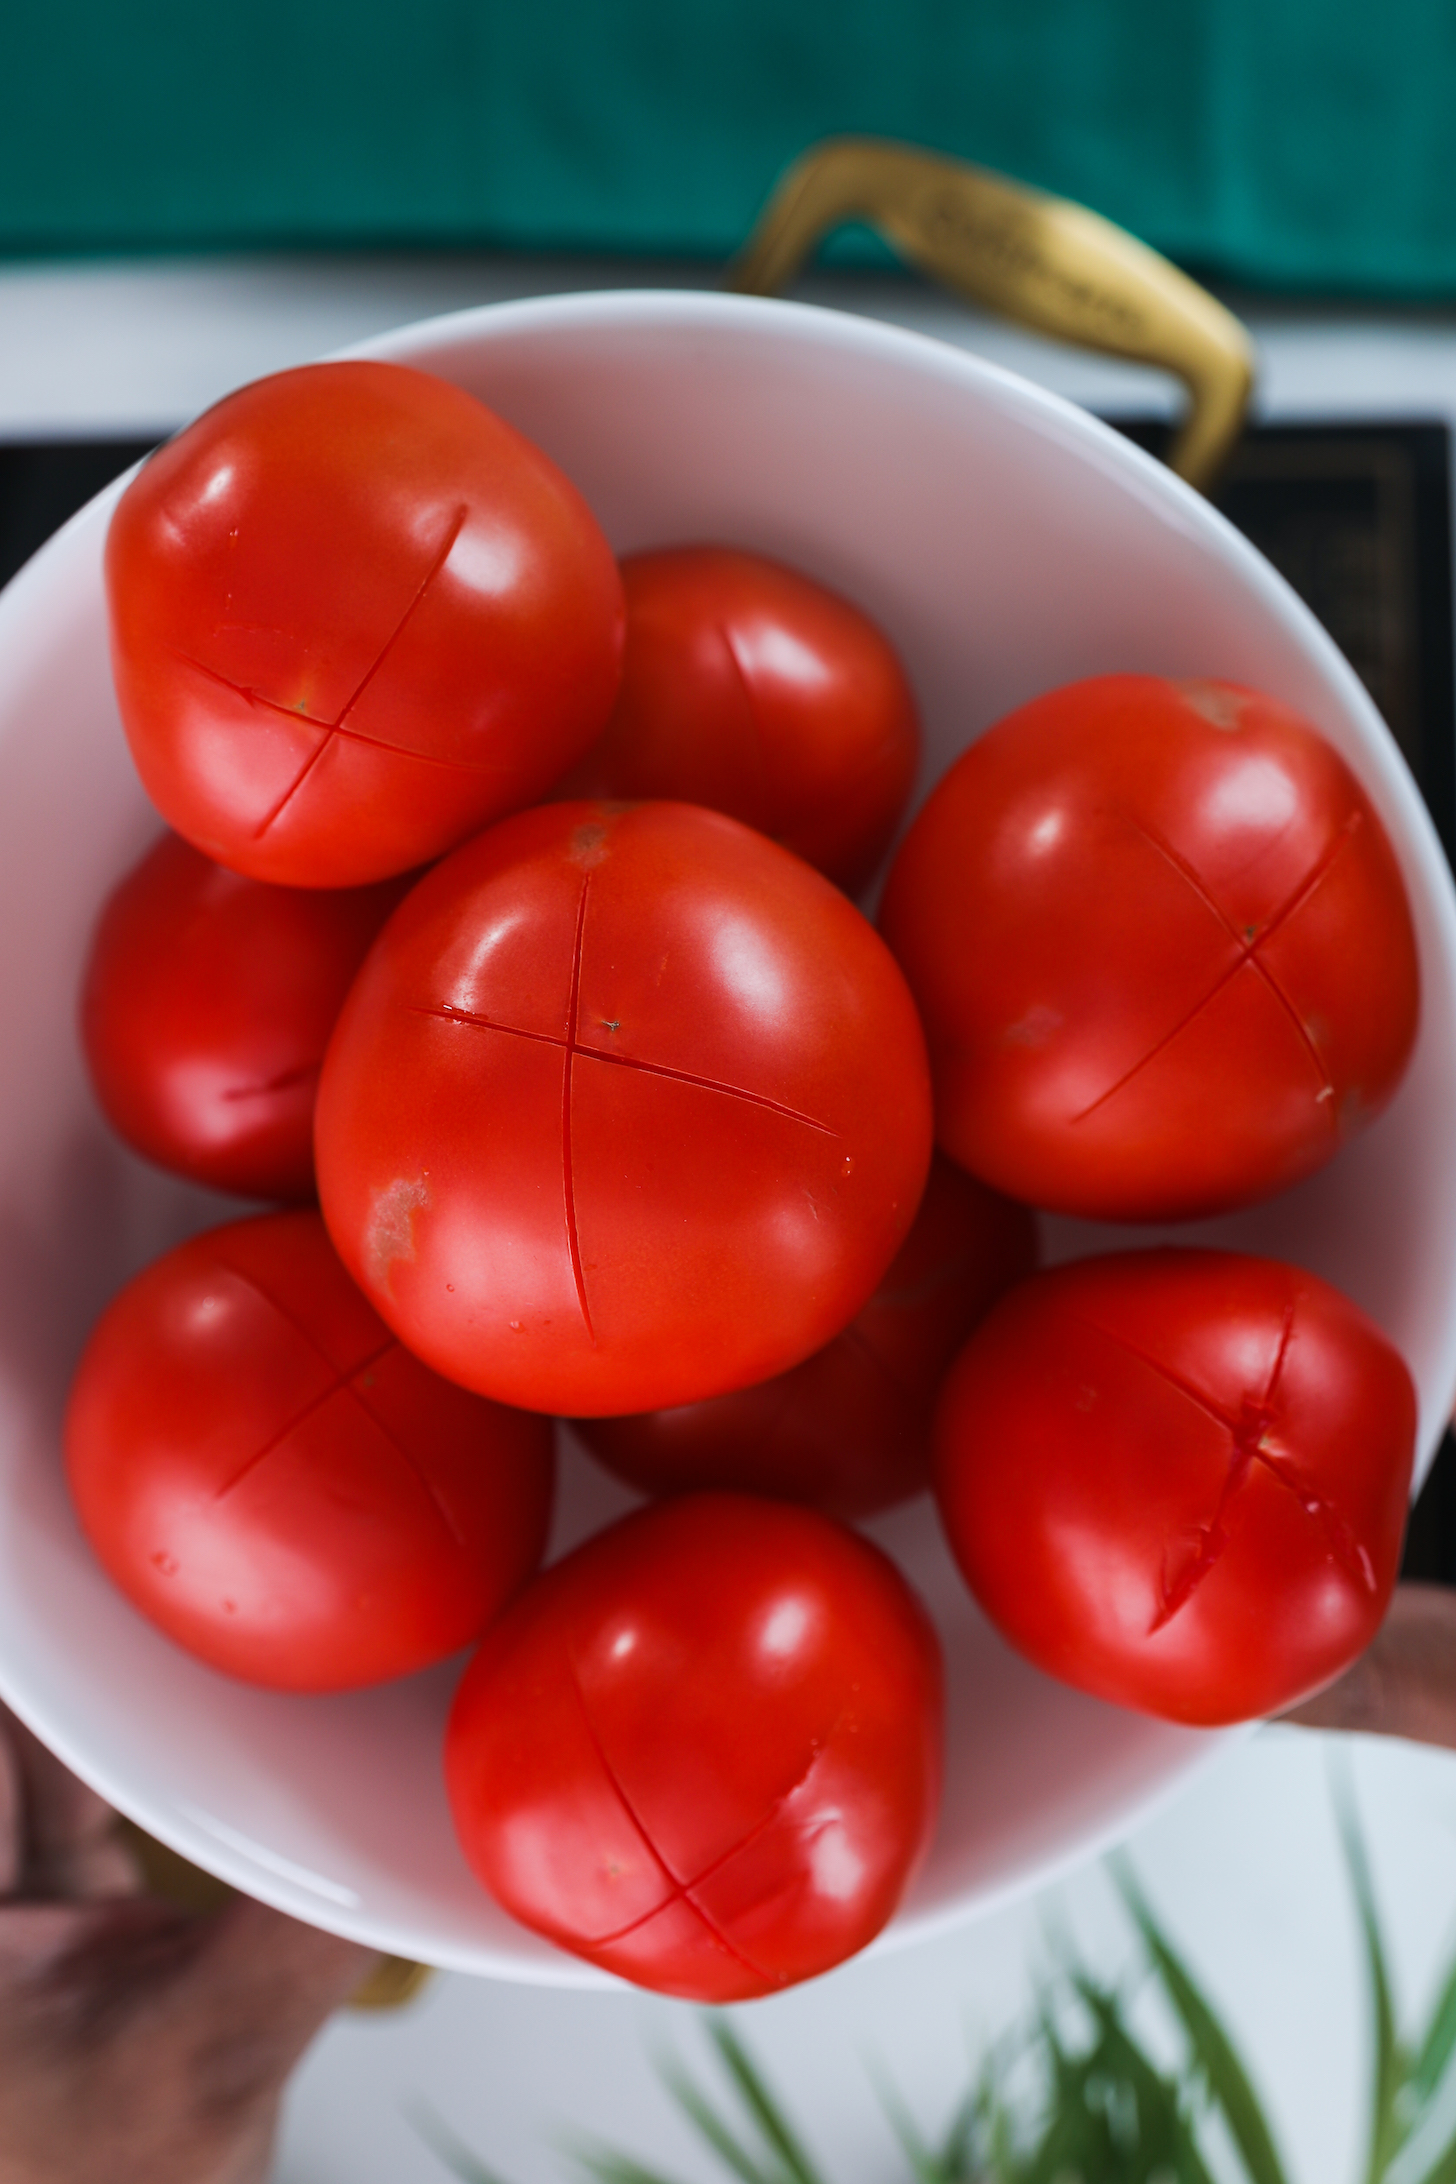 Slited tomatoes in a bowl.